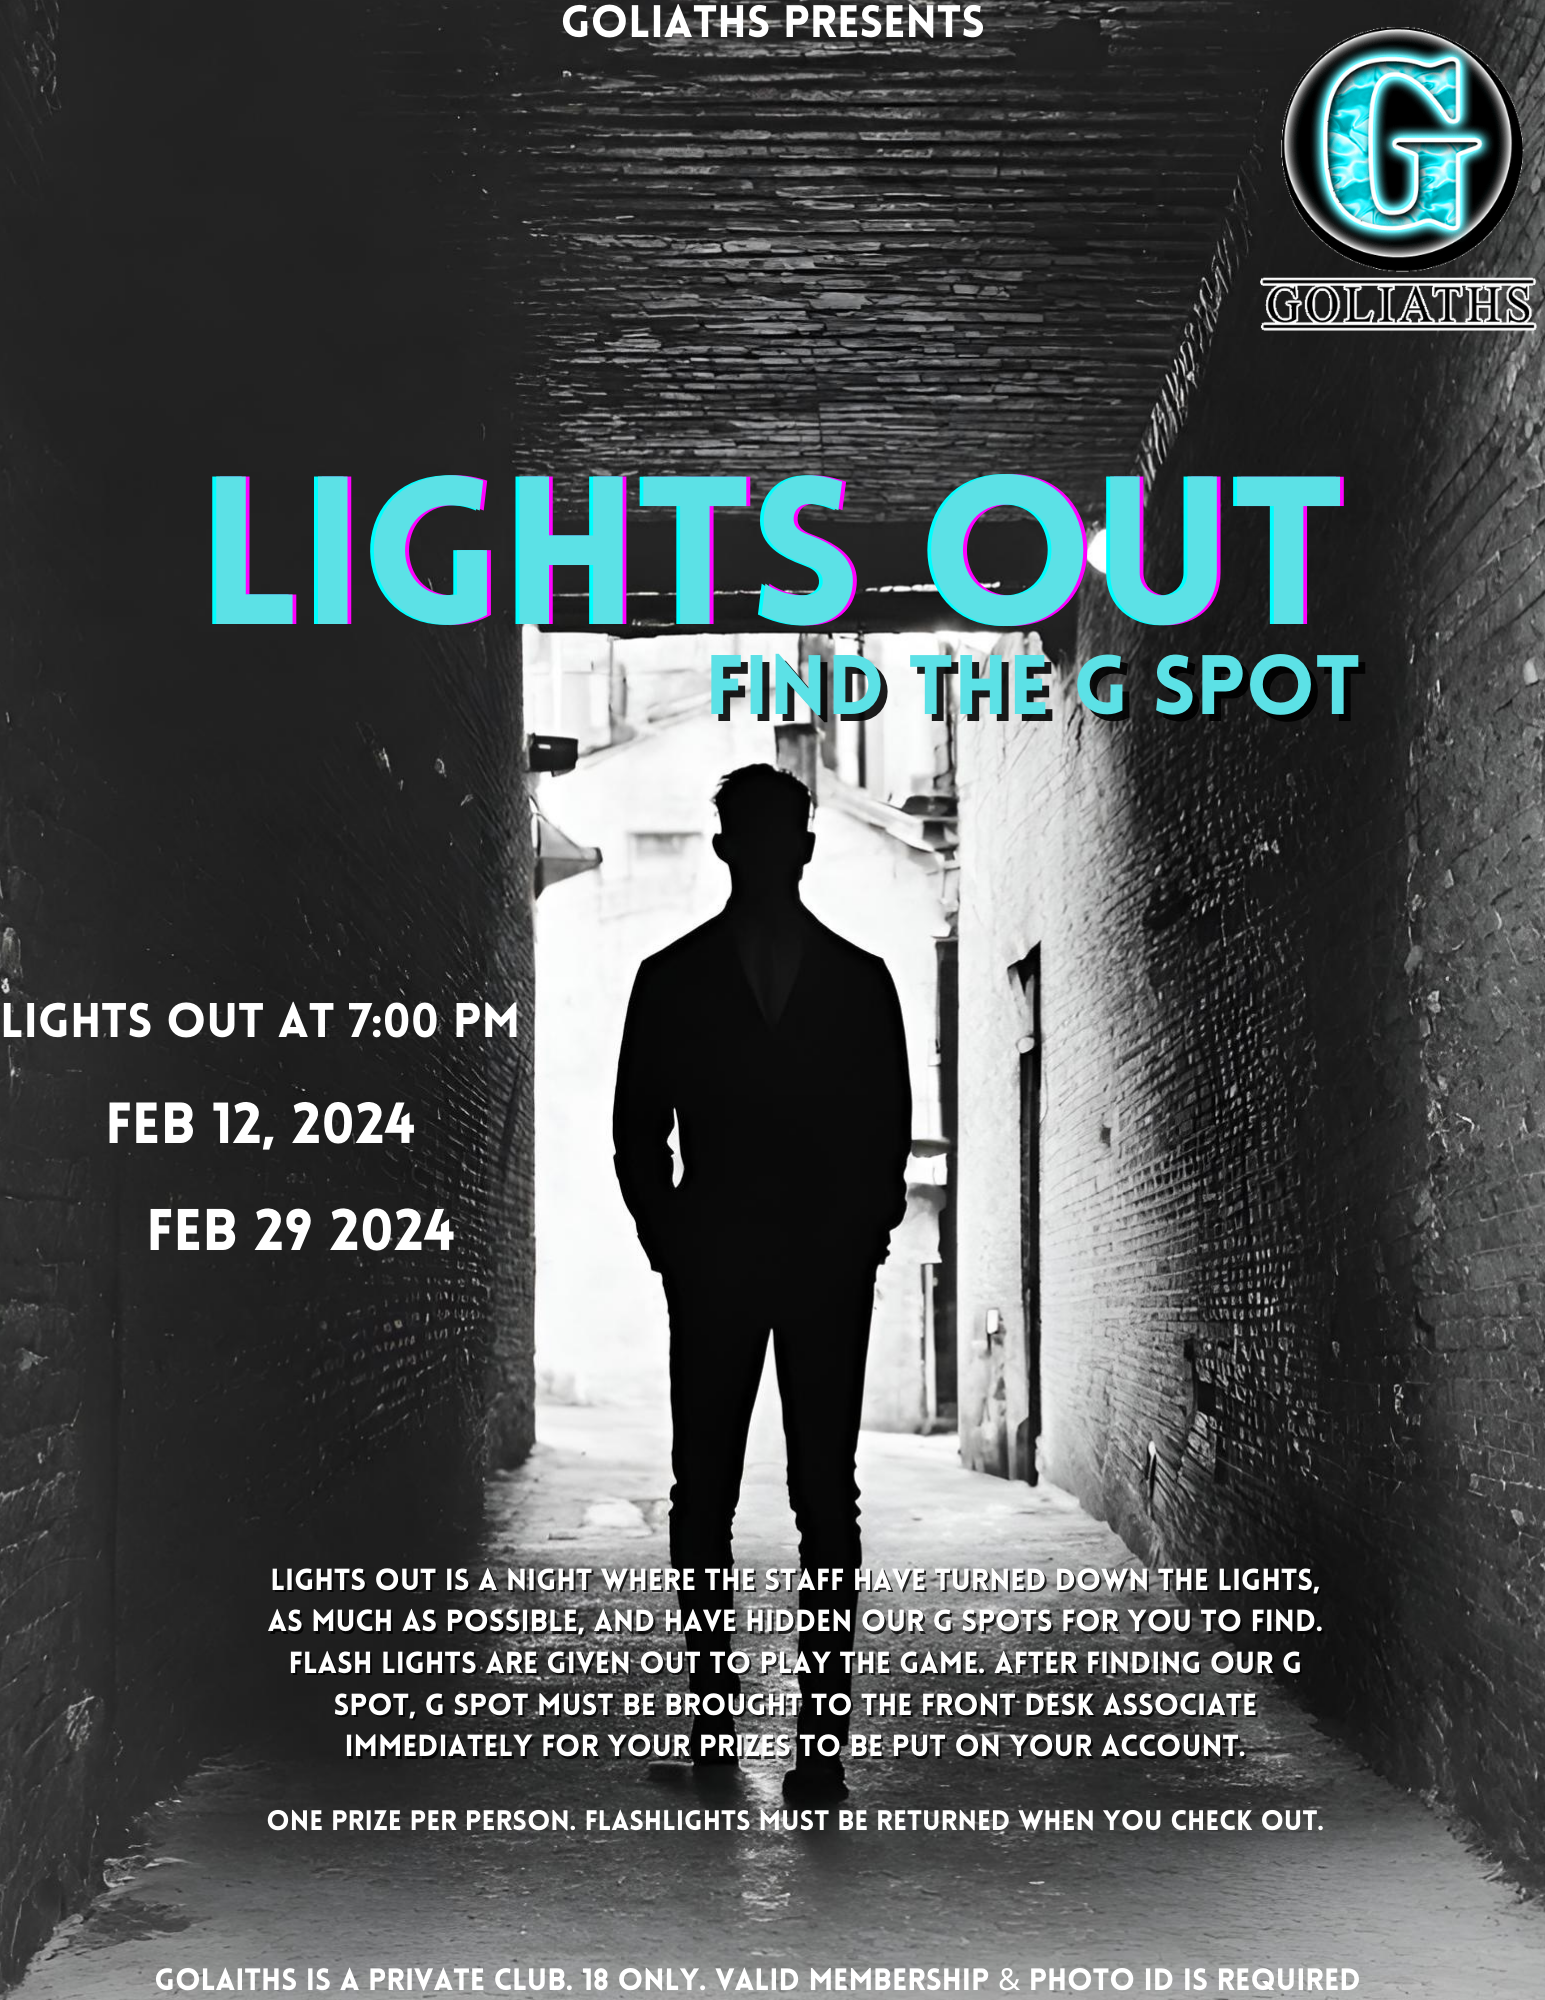 Lights out - FEB